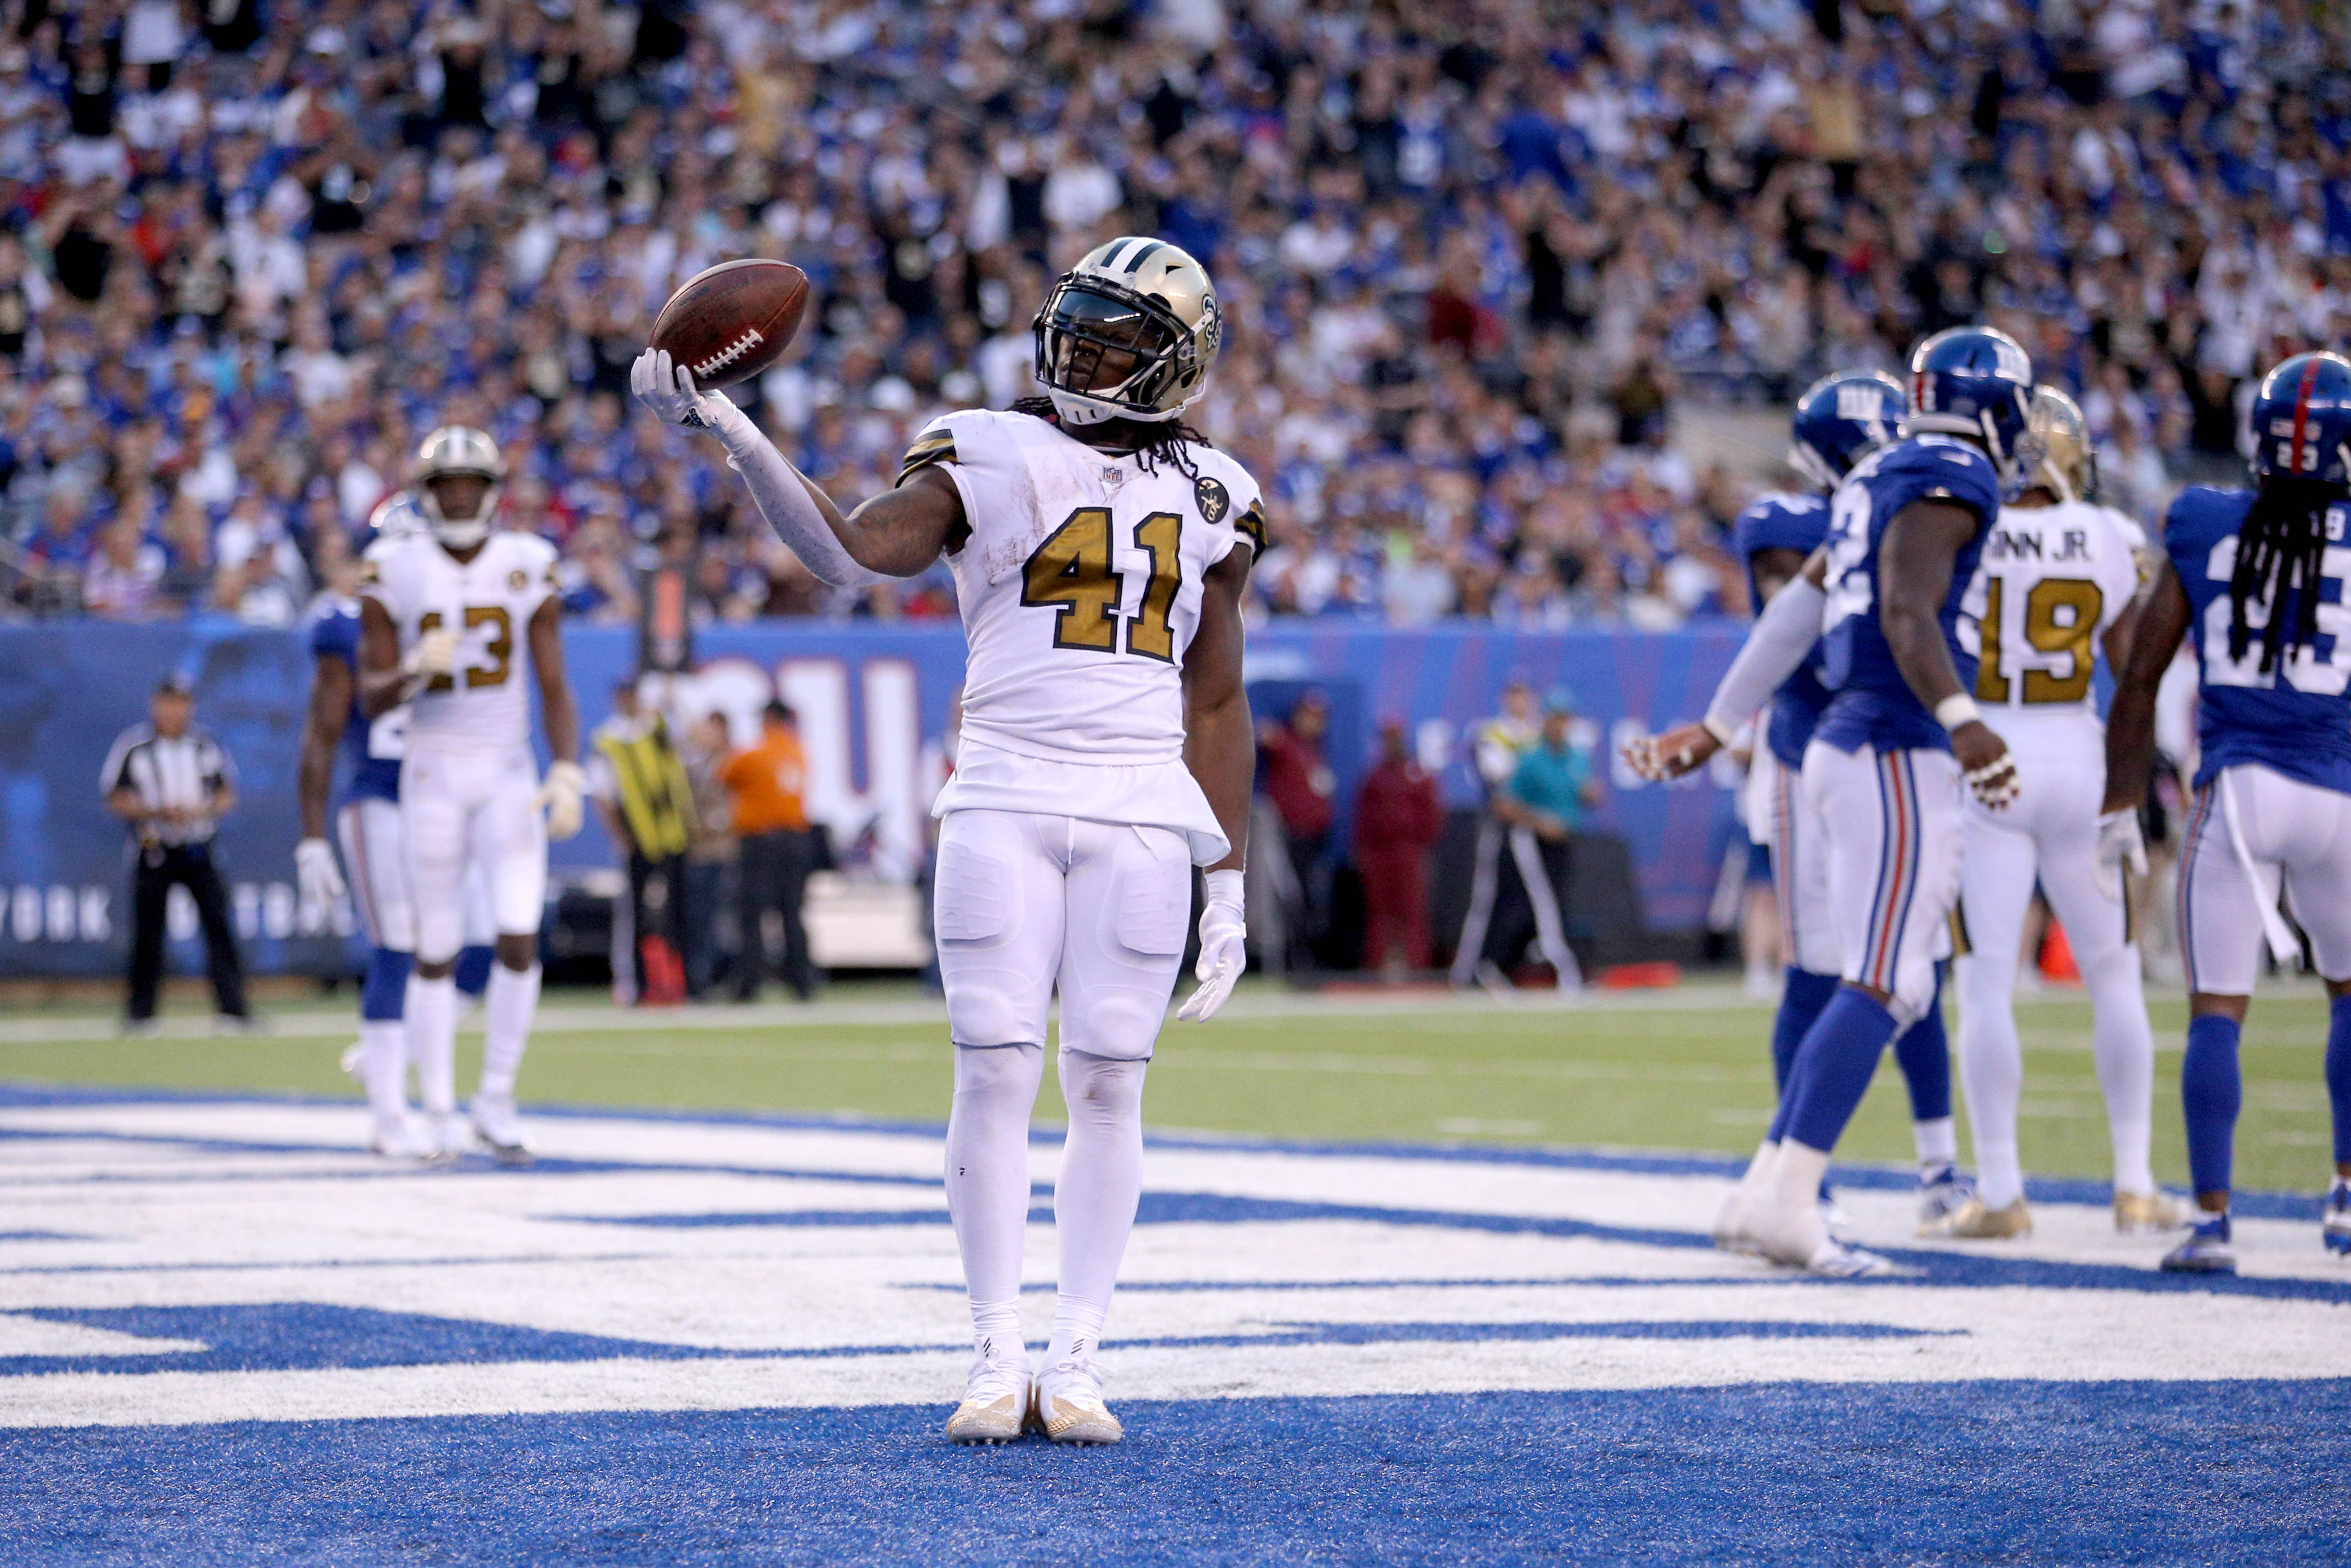 WATCH: Check out the highlights from the New Orleans Saints 33-18 win over the New York Giants